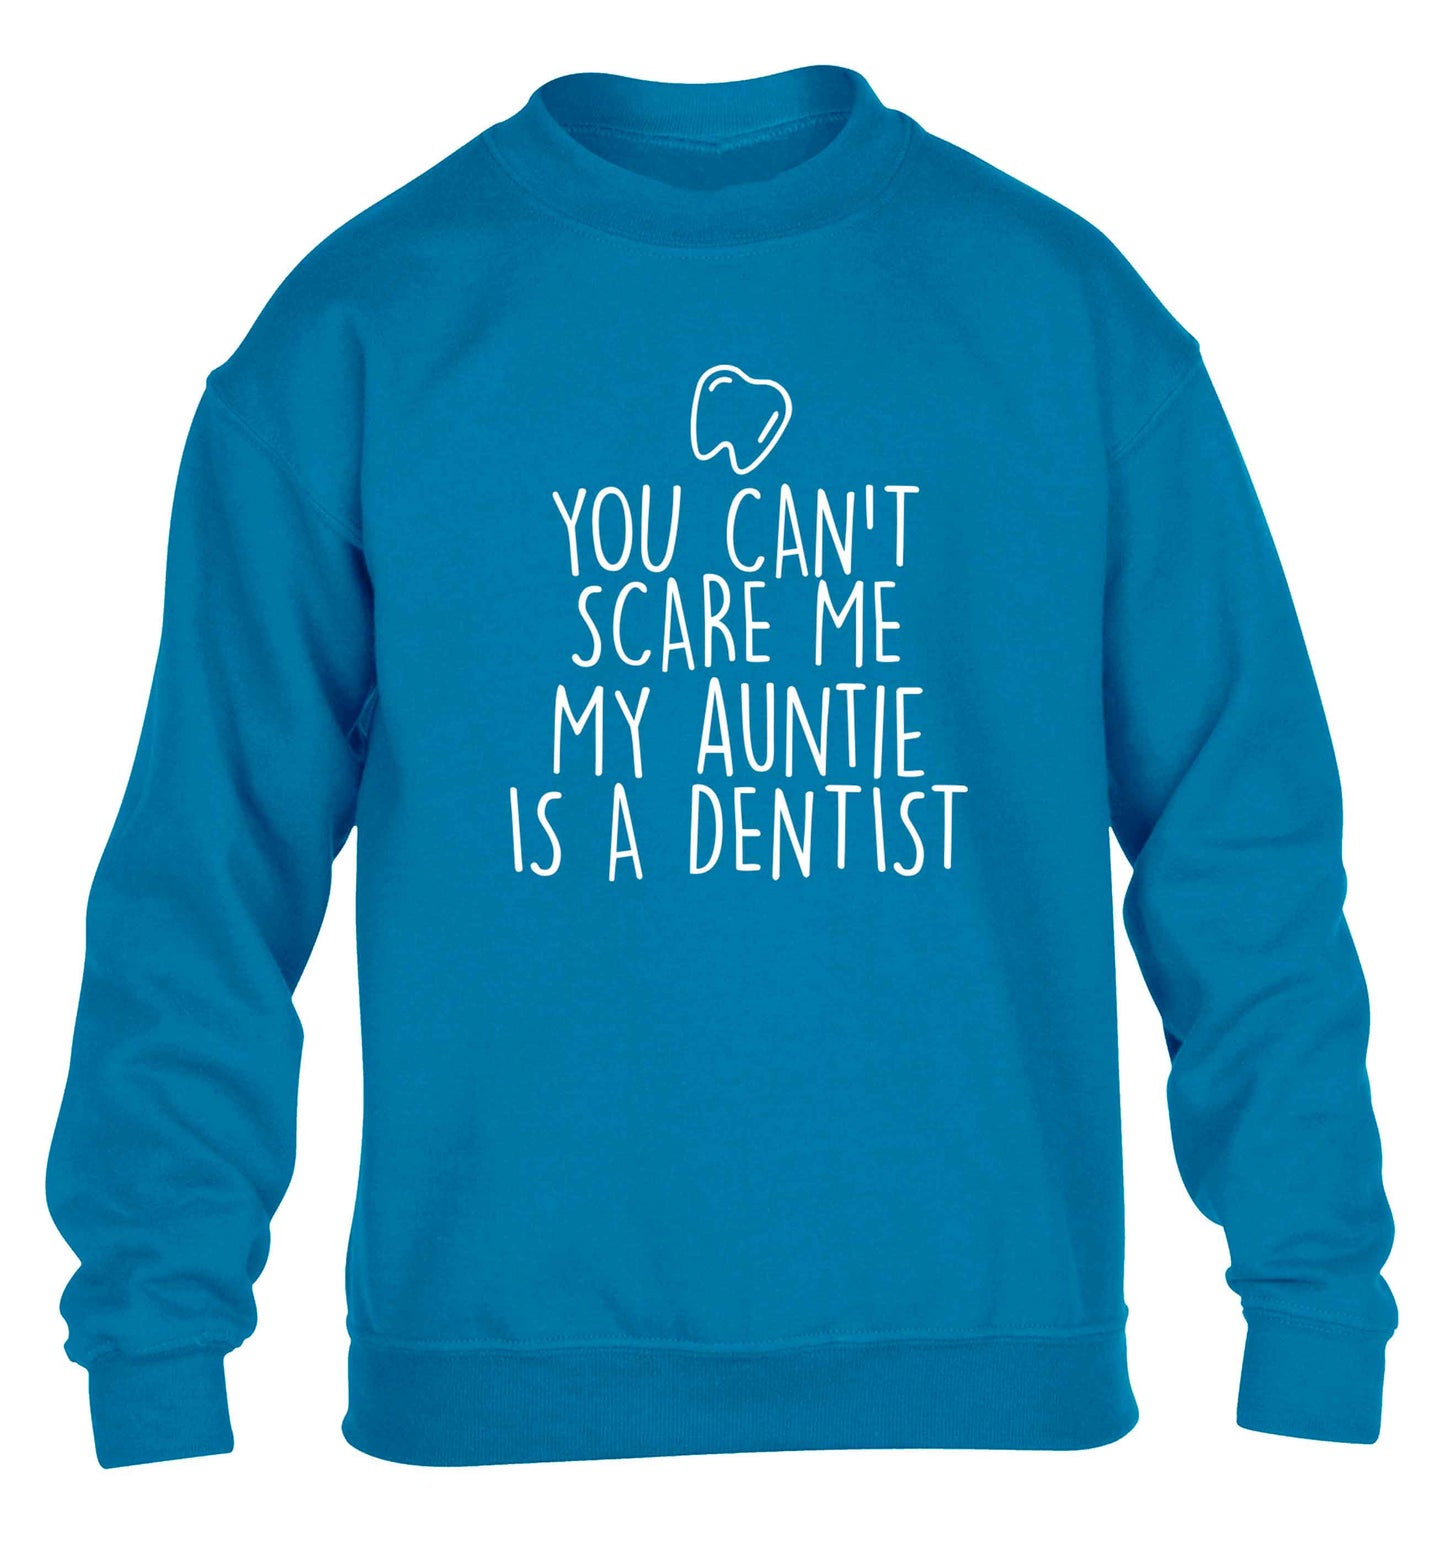 You can't scare me my auntie is a dentist children's blue sweater 12-13 Years